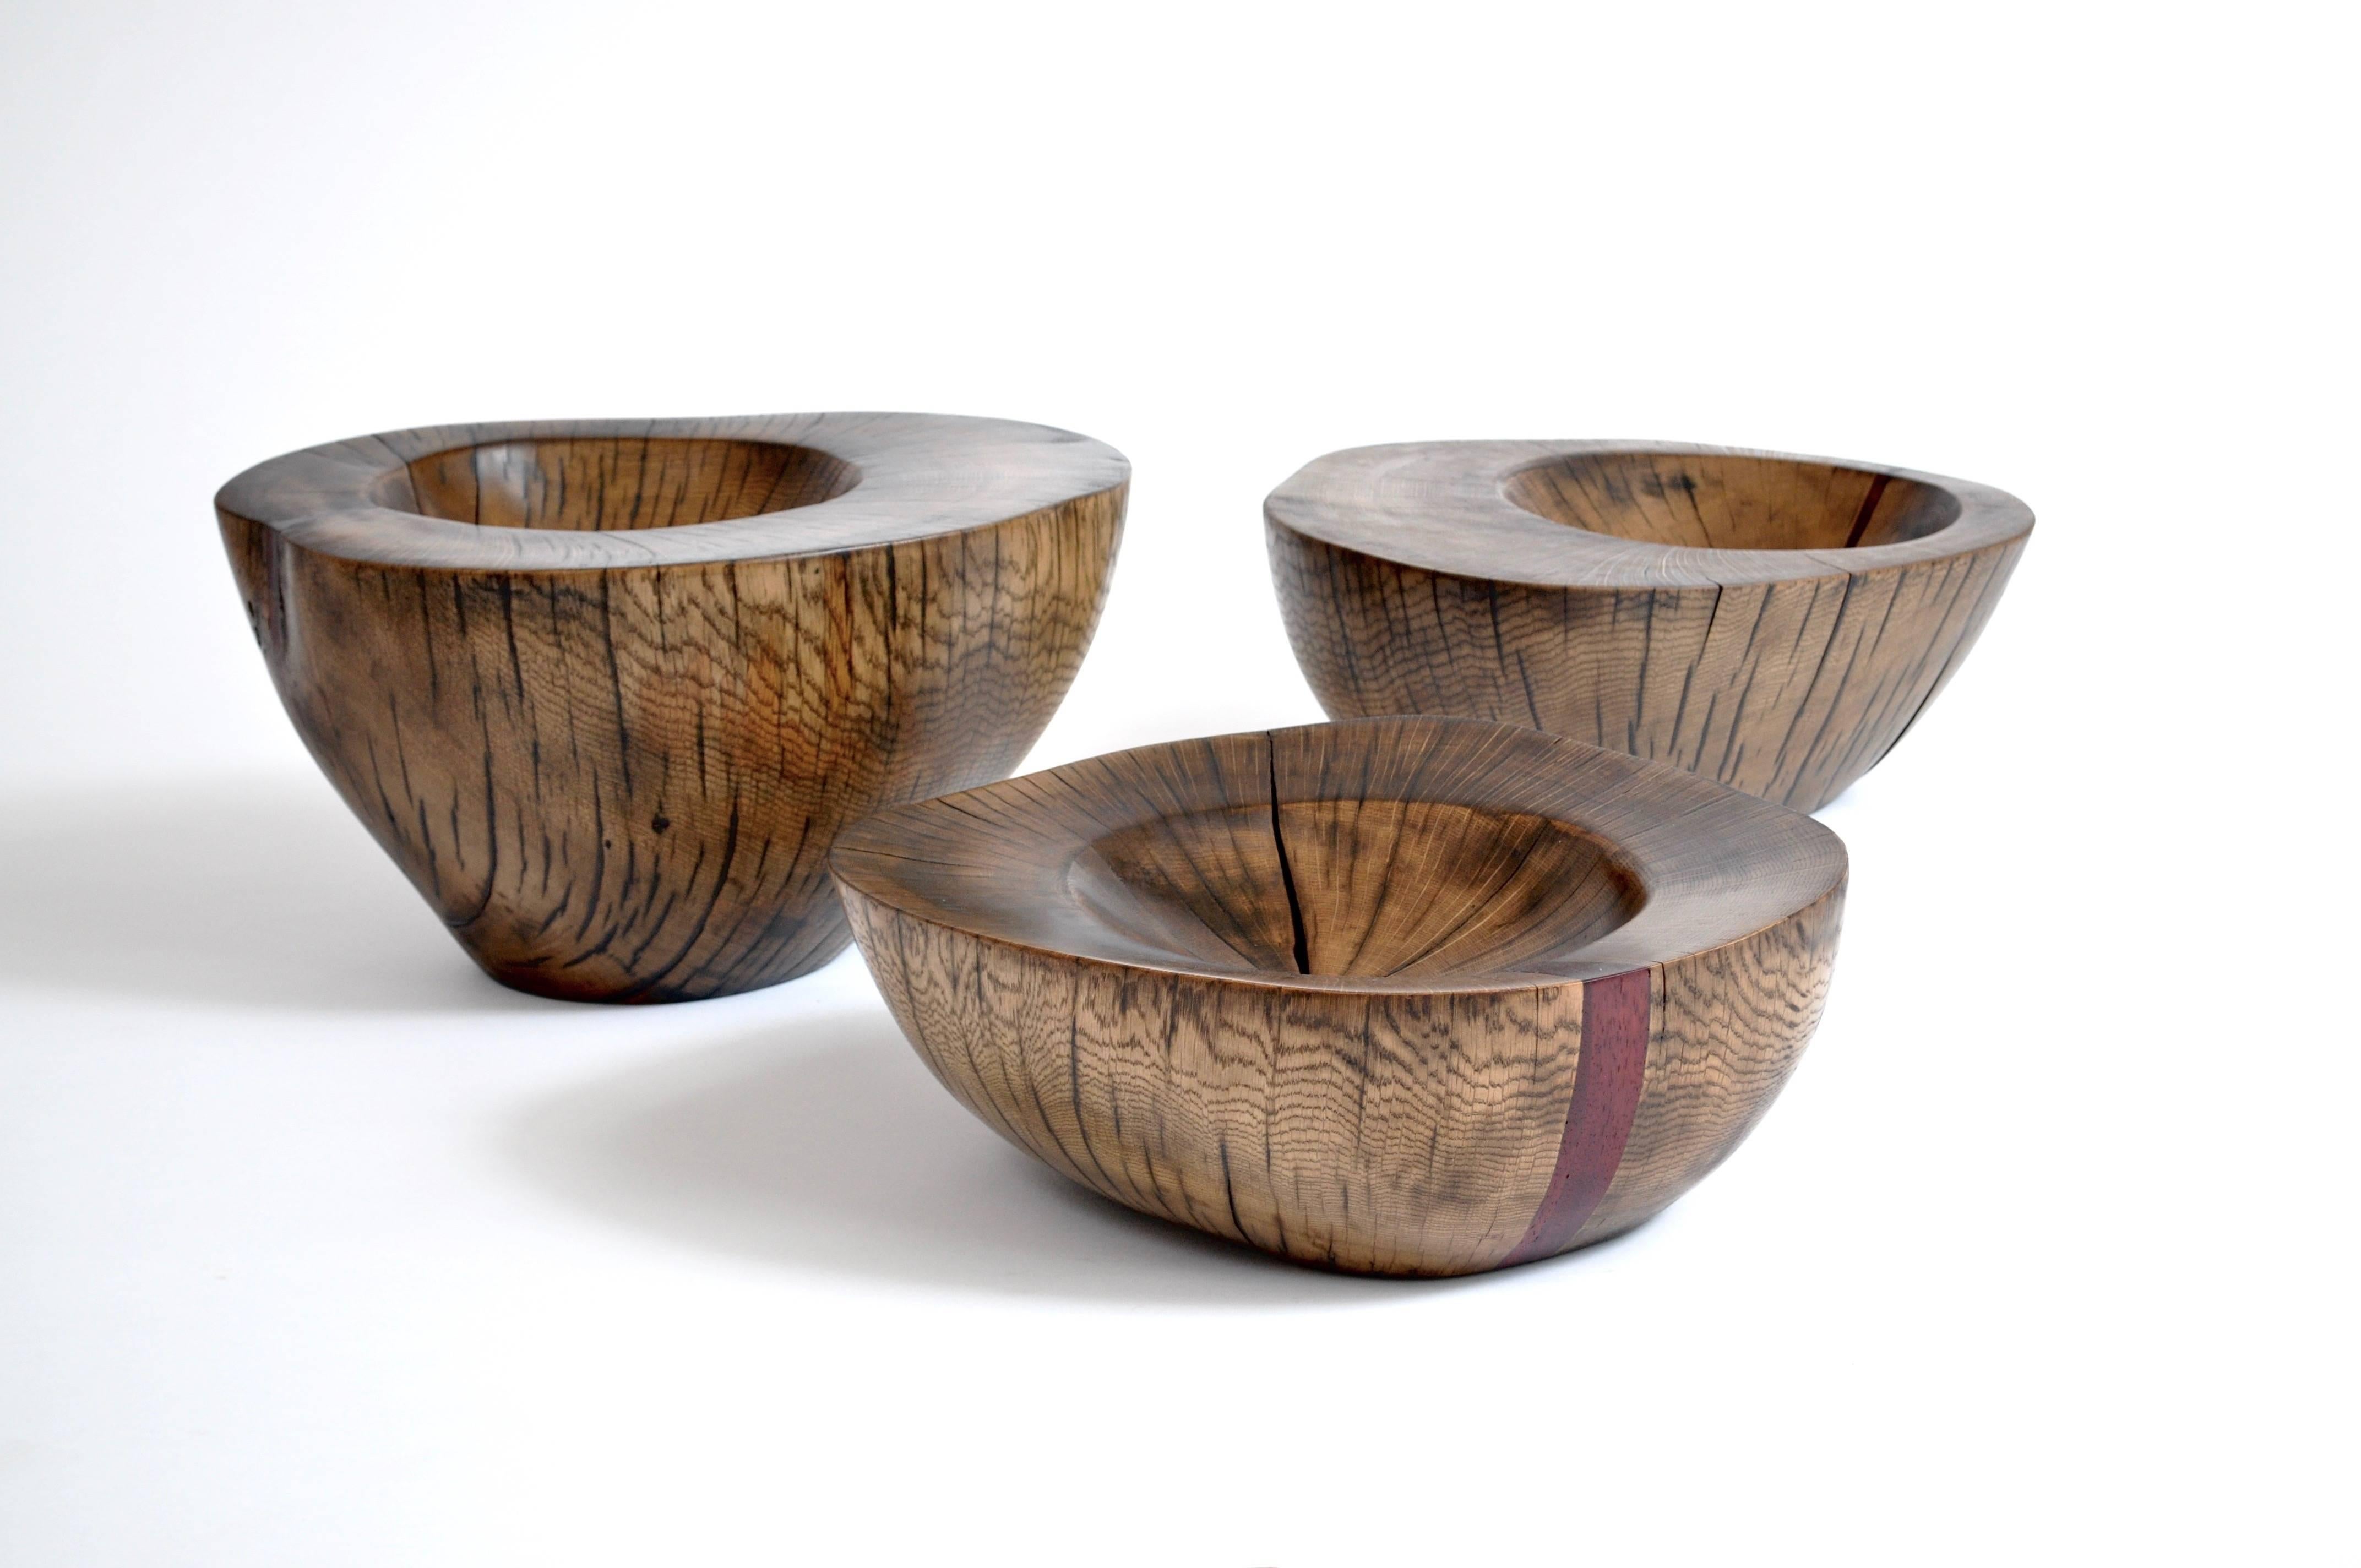 Unique signed bowls by Jörg Pietschmann
Bowls: Oak, padouk, ebonized · V1285
Measures: H 26, 20, 16 Ø 50, 47, 48 cm
Three bowls made from a large branch of a fallen majestic oak tree,
with a insert from padouk.
Polished oil finish.

In